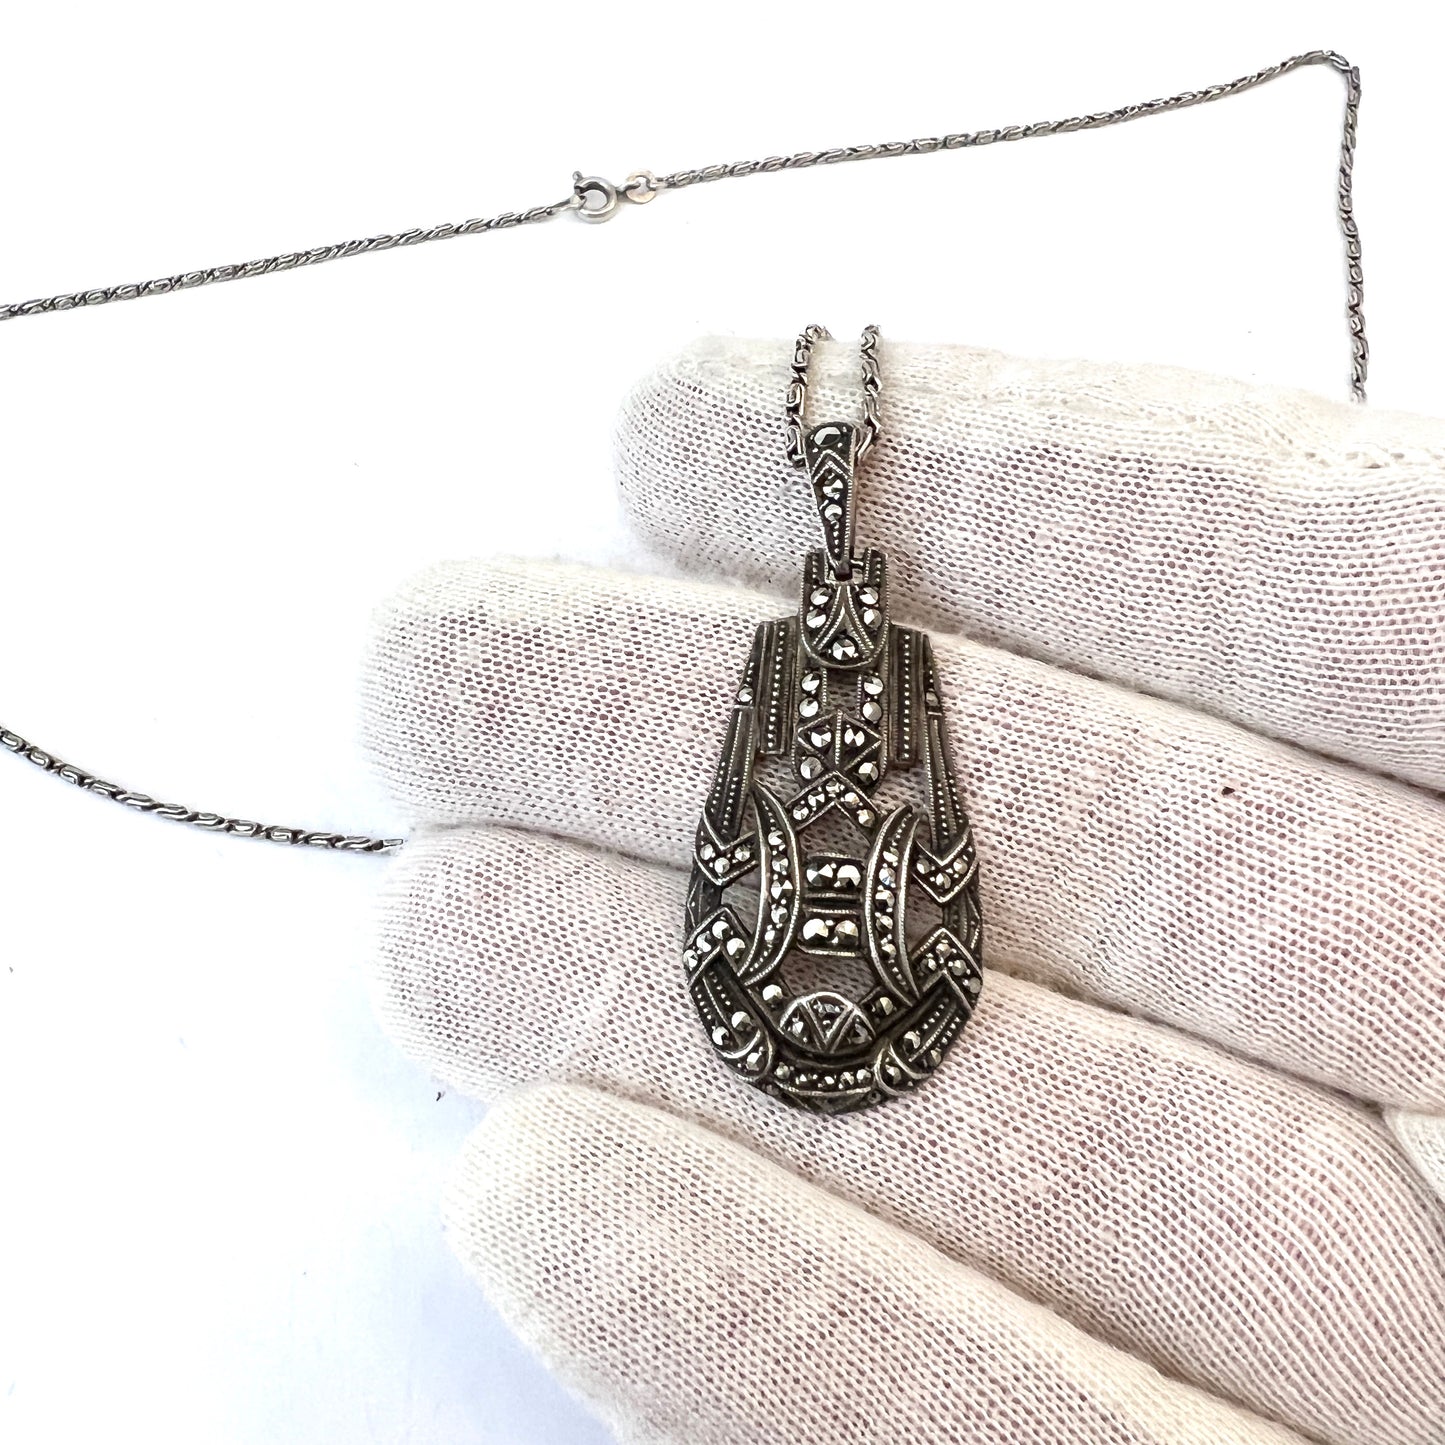 Germany / Sweden Art Deco 935 Sterling Marcasite Pendant Long Chain Necklace.